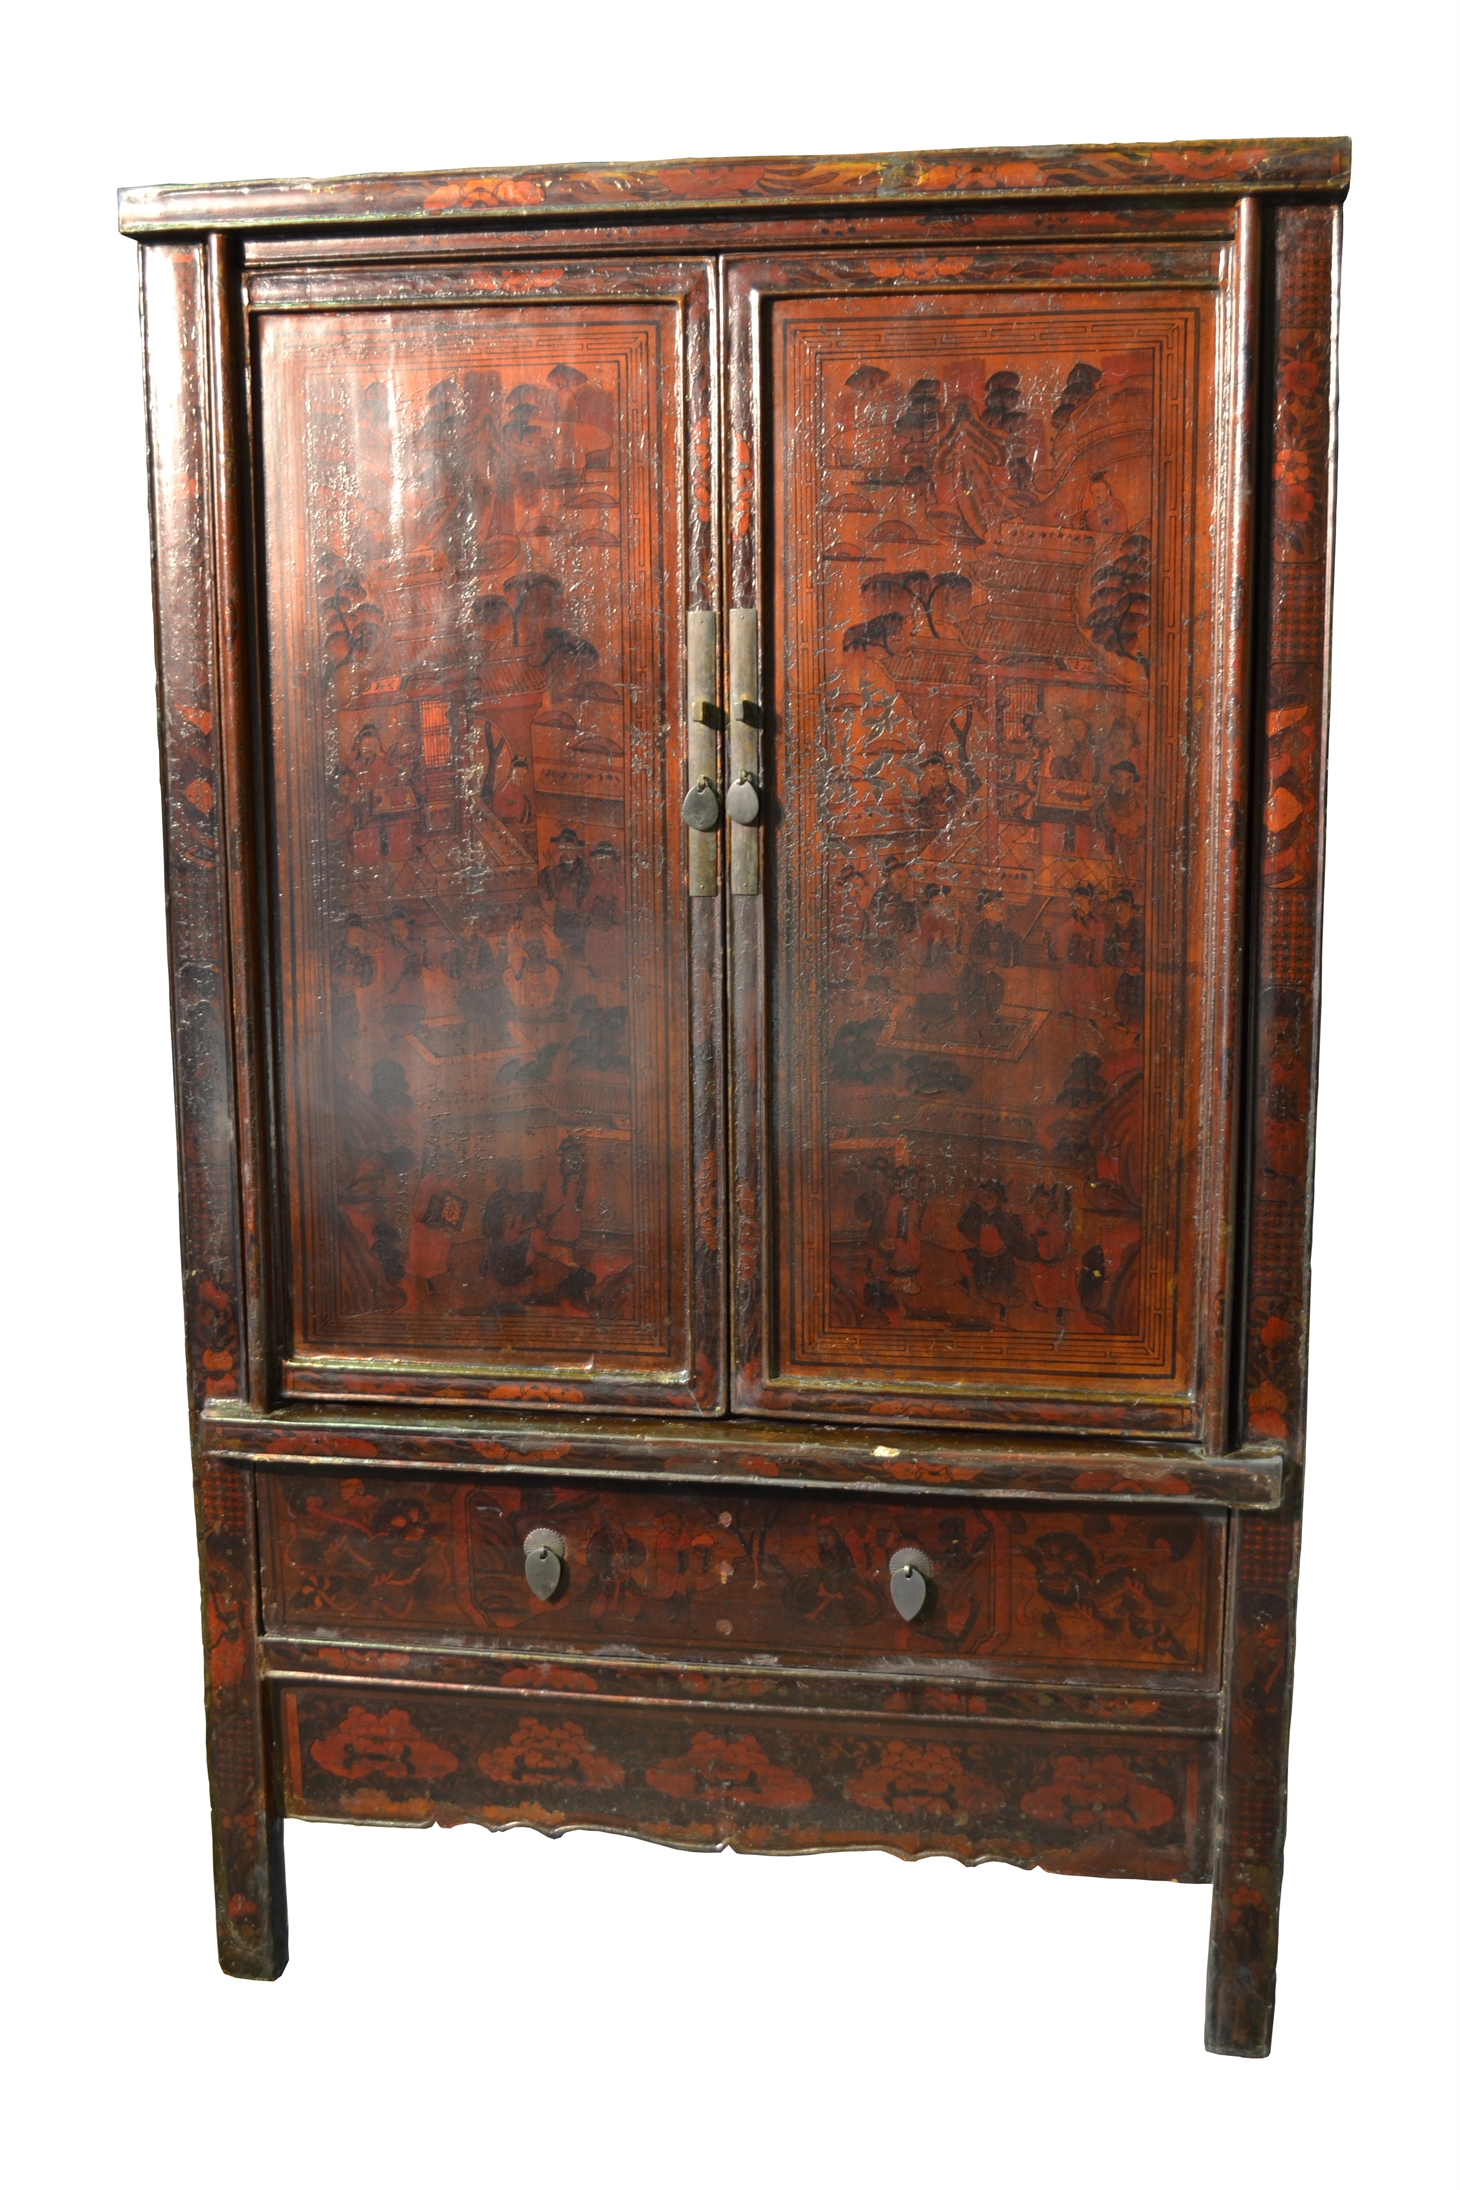 mb/3038 - Oriental Lacquer Cupboard